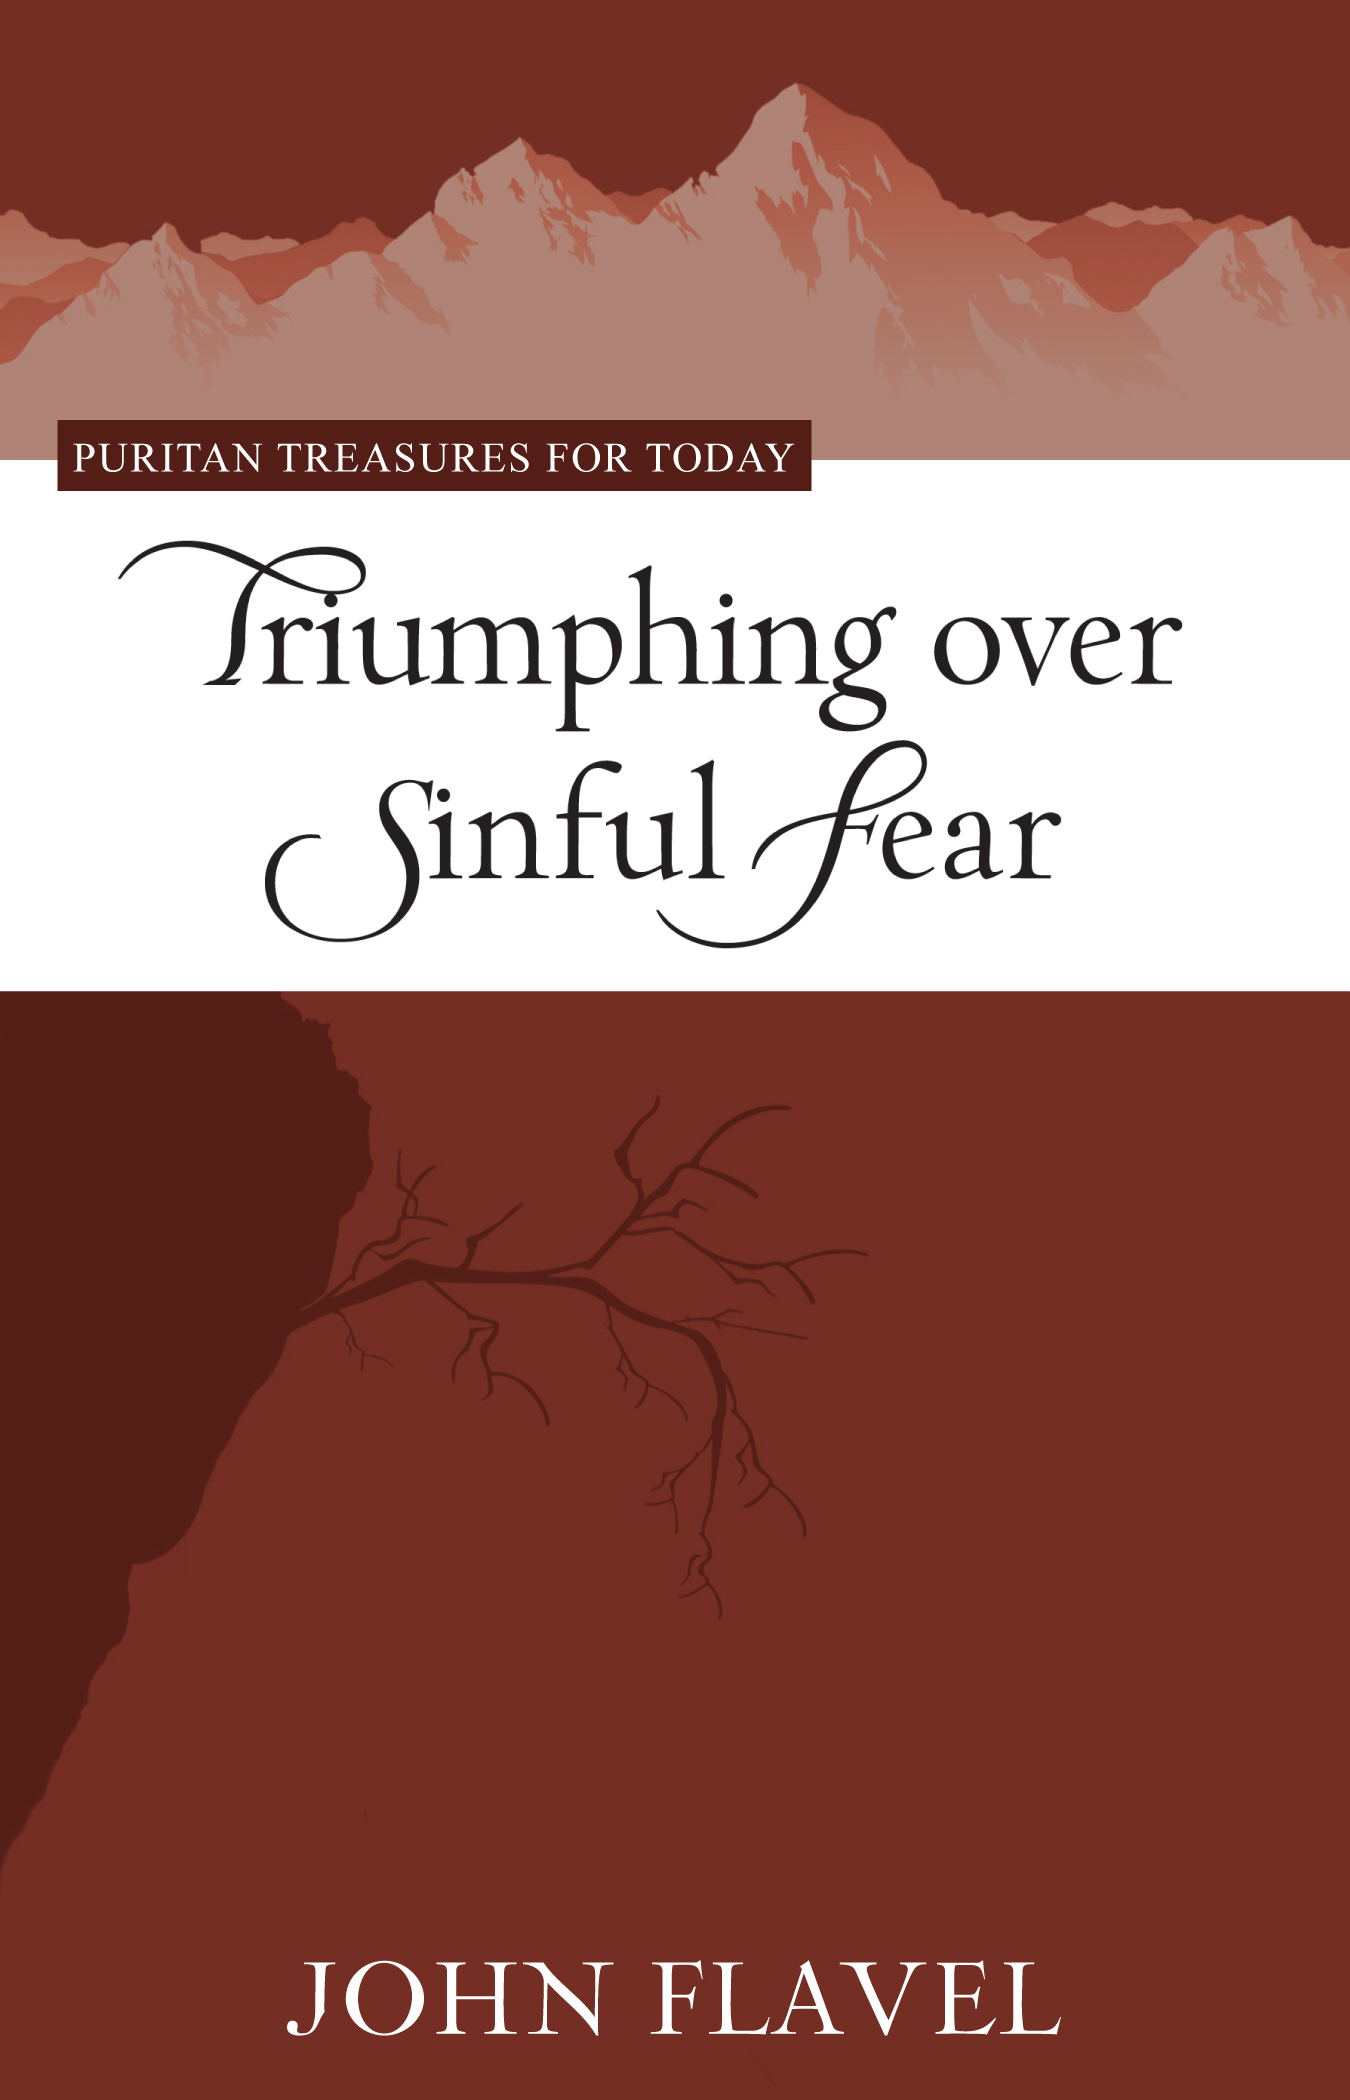 Triumphing Over Sinful Fear John Flavel and J. Stephen Yuille